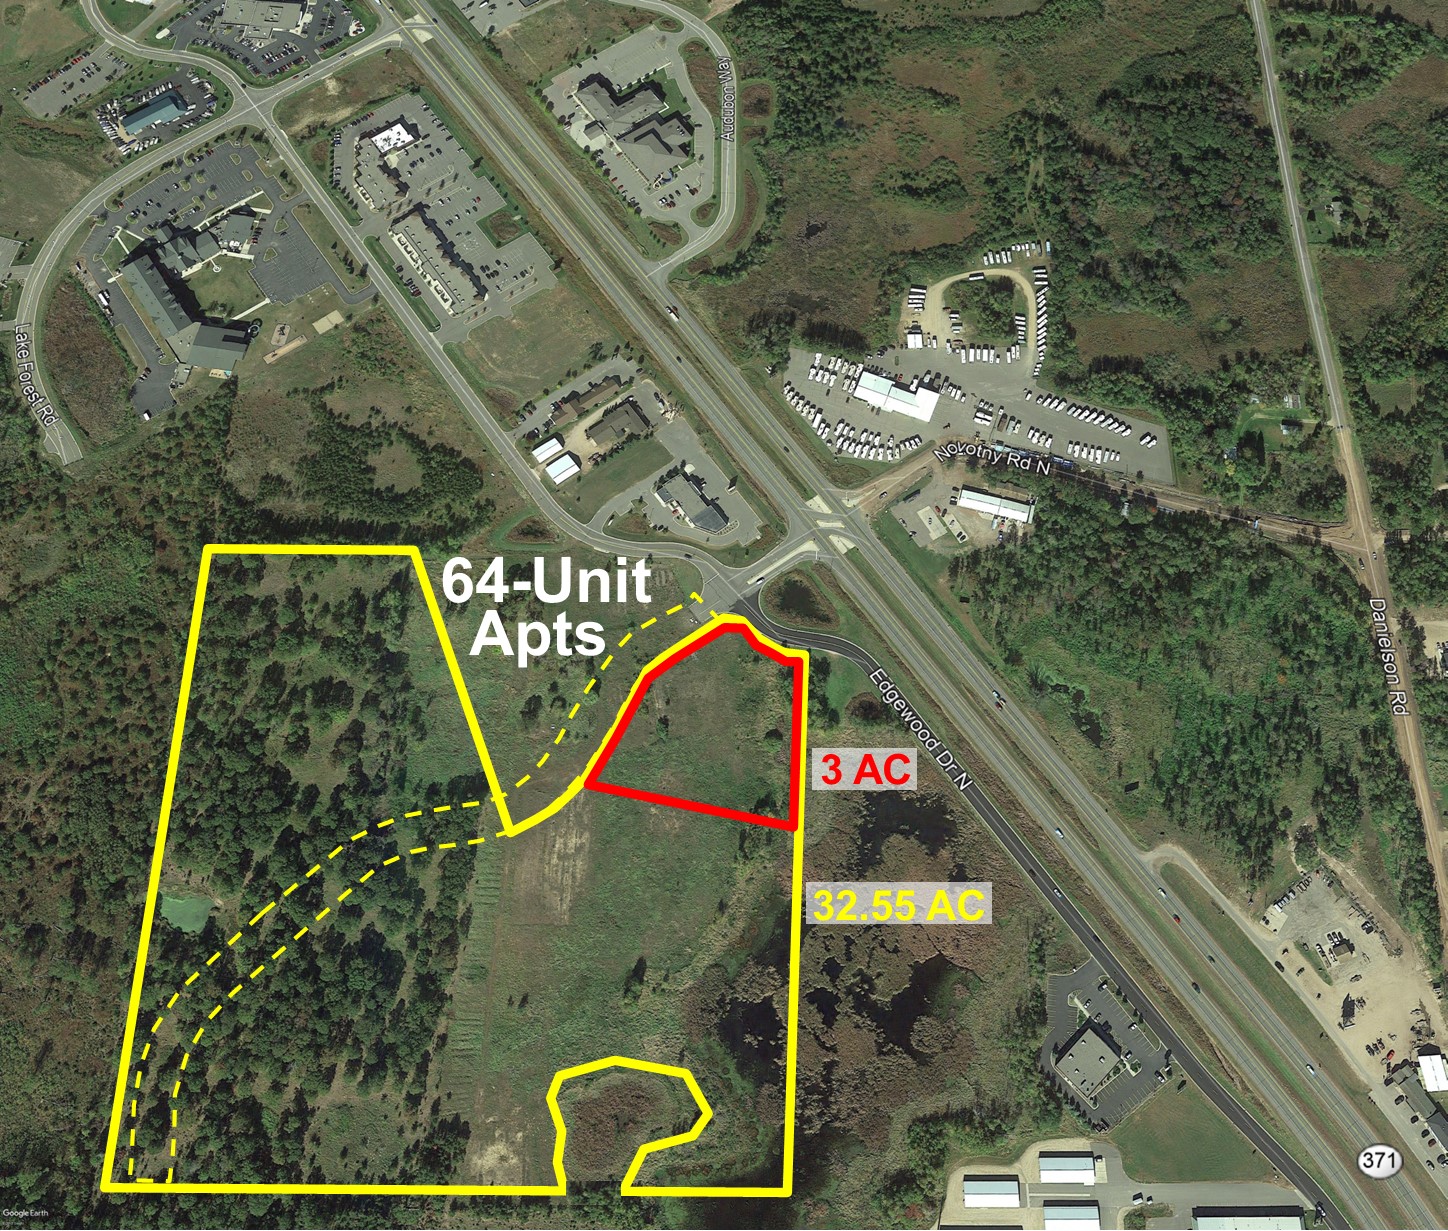 Hwy 371 Commercial Acreage (32.55 AC)